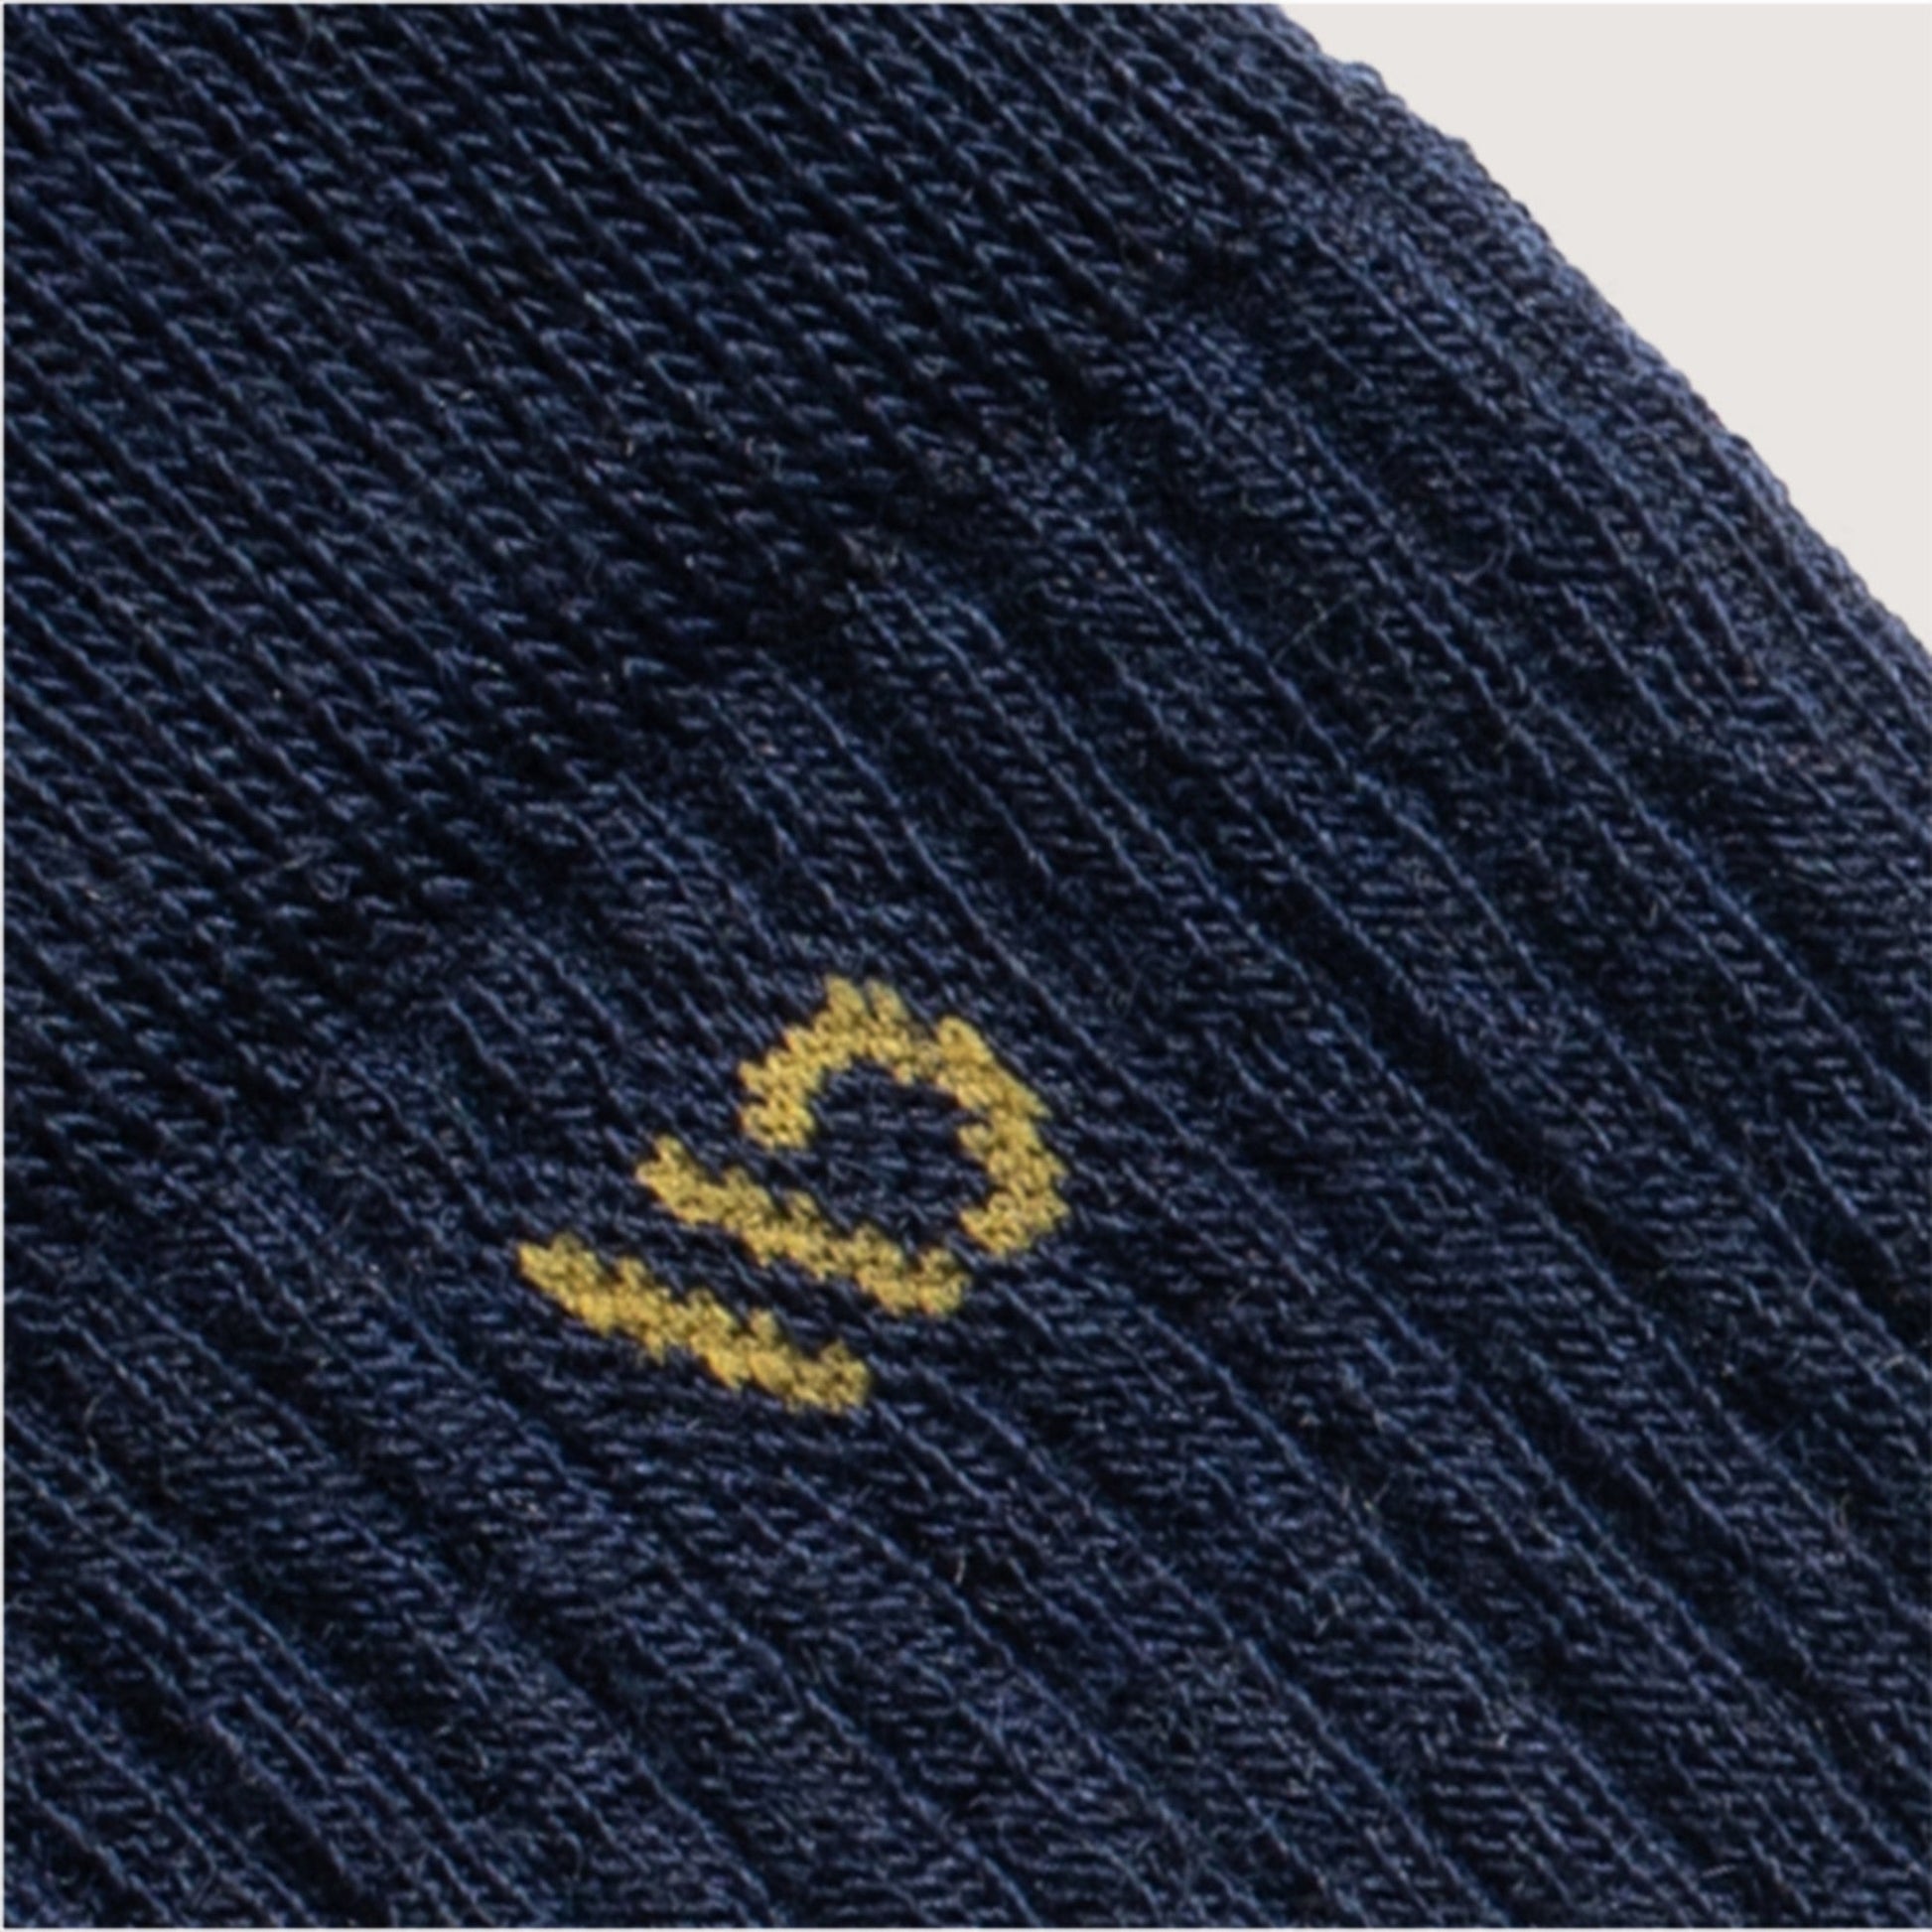 Detail featuring a yellow logo and navy body --Black/Light Gray/Denim